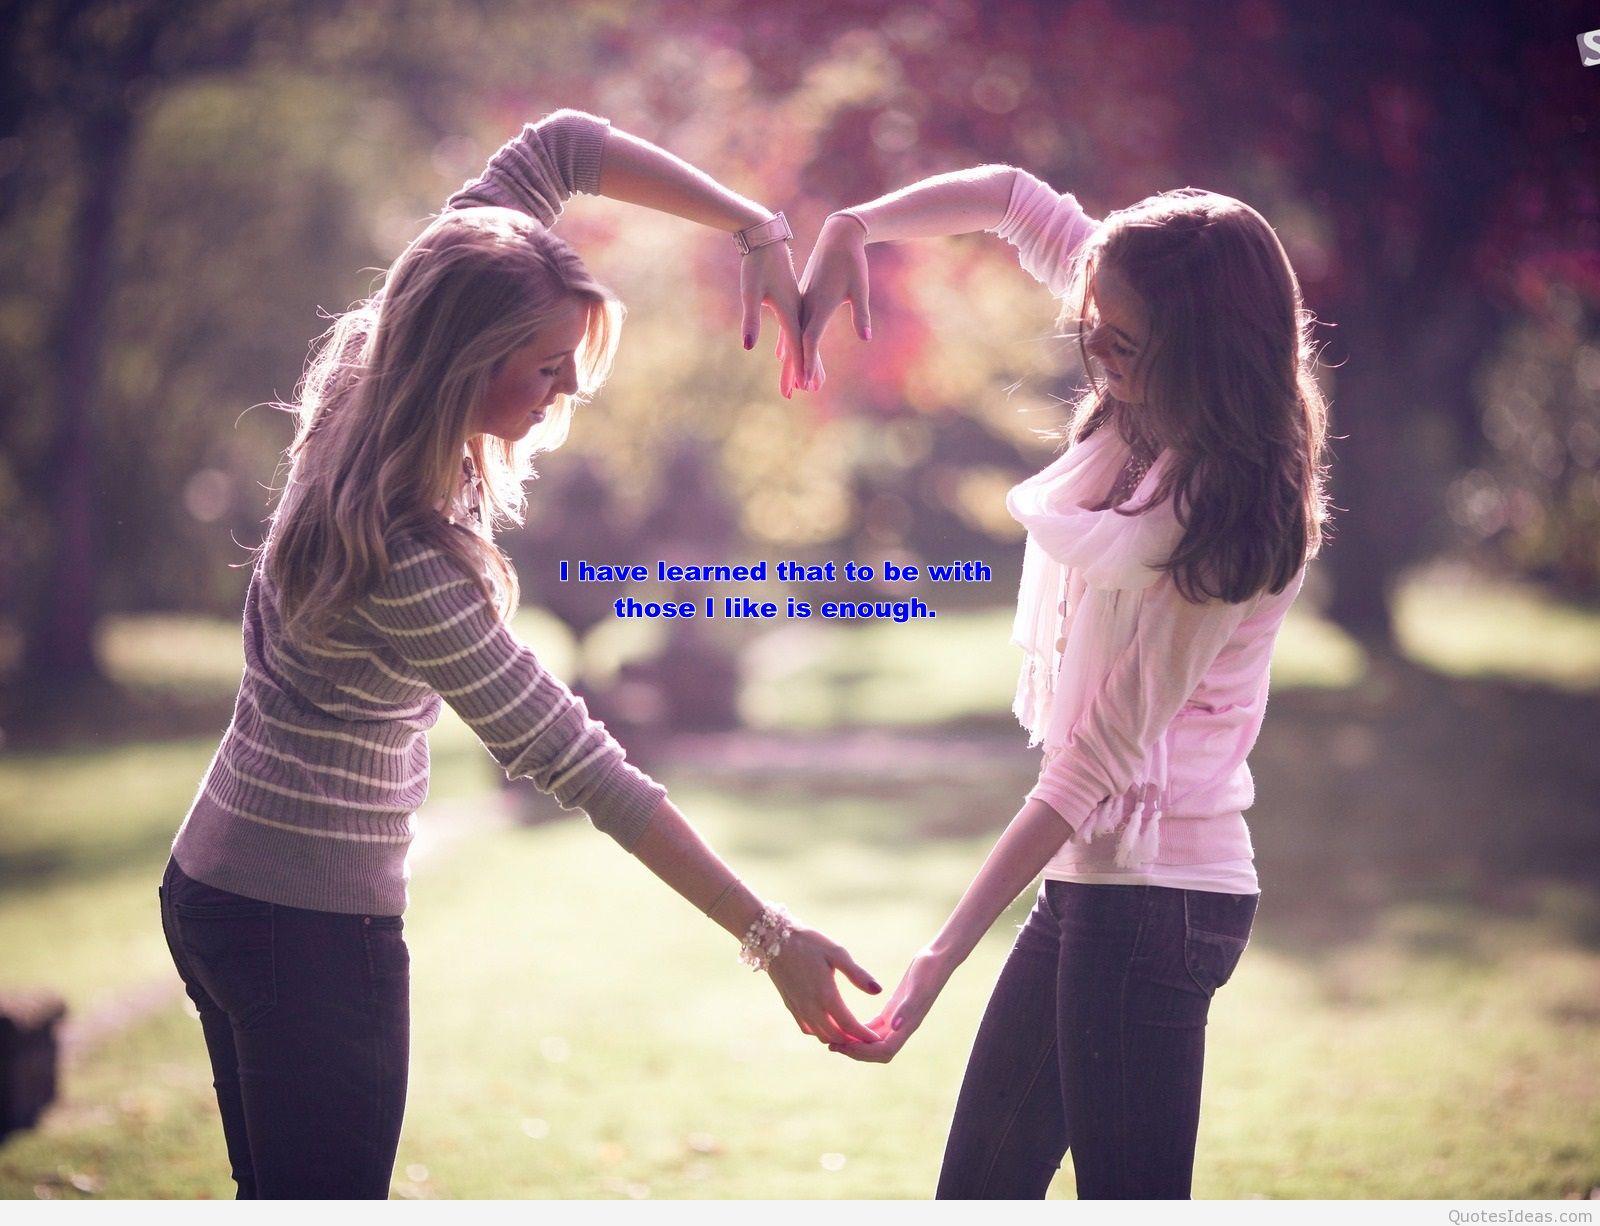 Best Friends Quotes And Friendship On